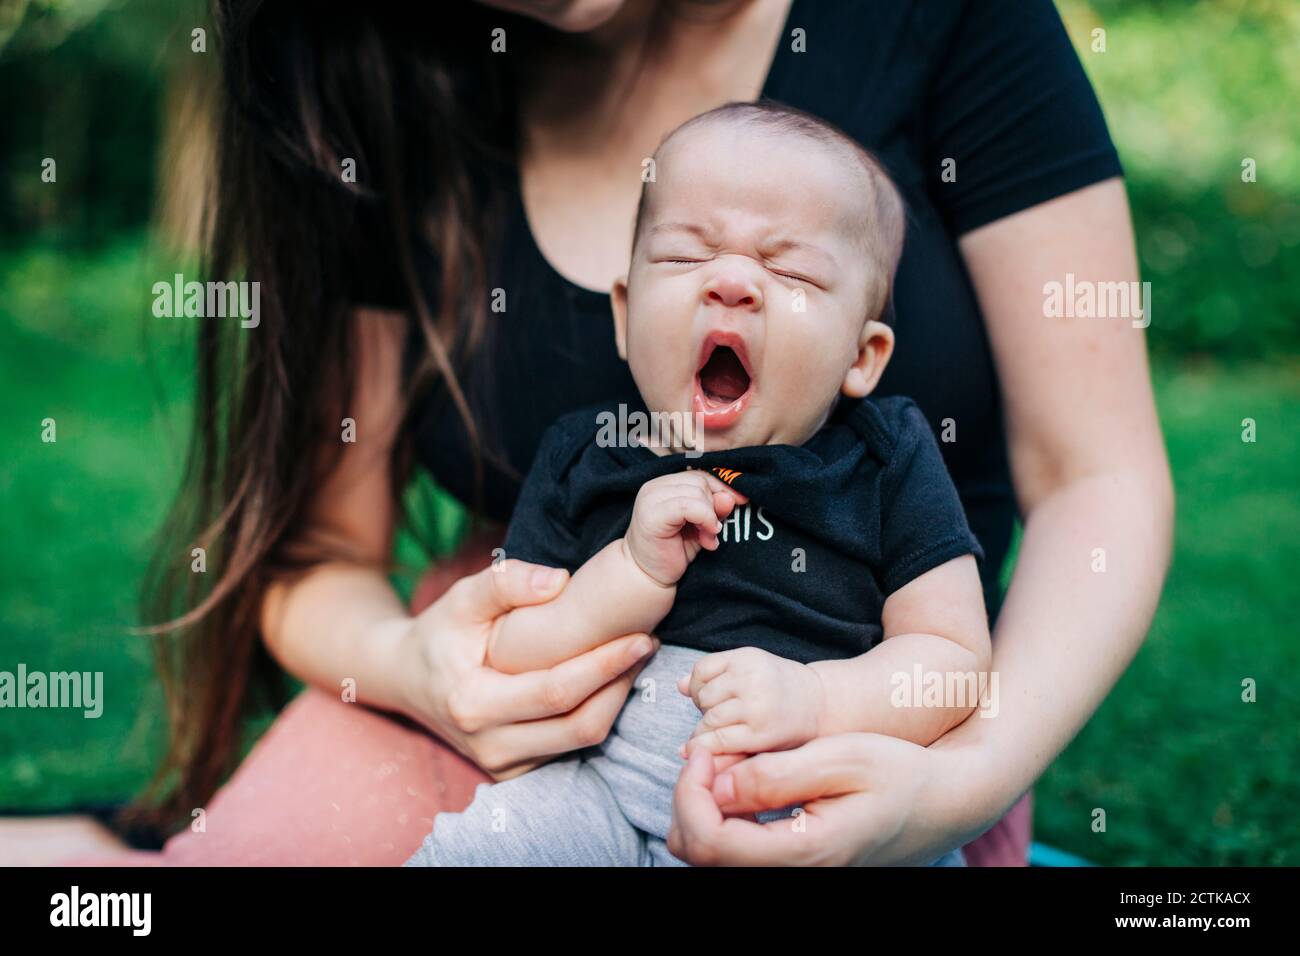 Tired baby boy yawning while sitting with mother at park during weekend Stock Photo